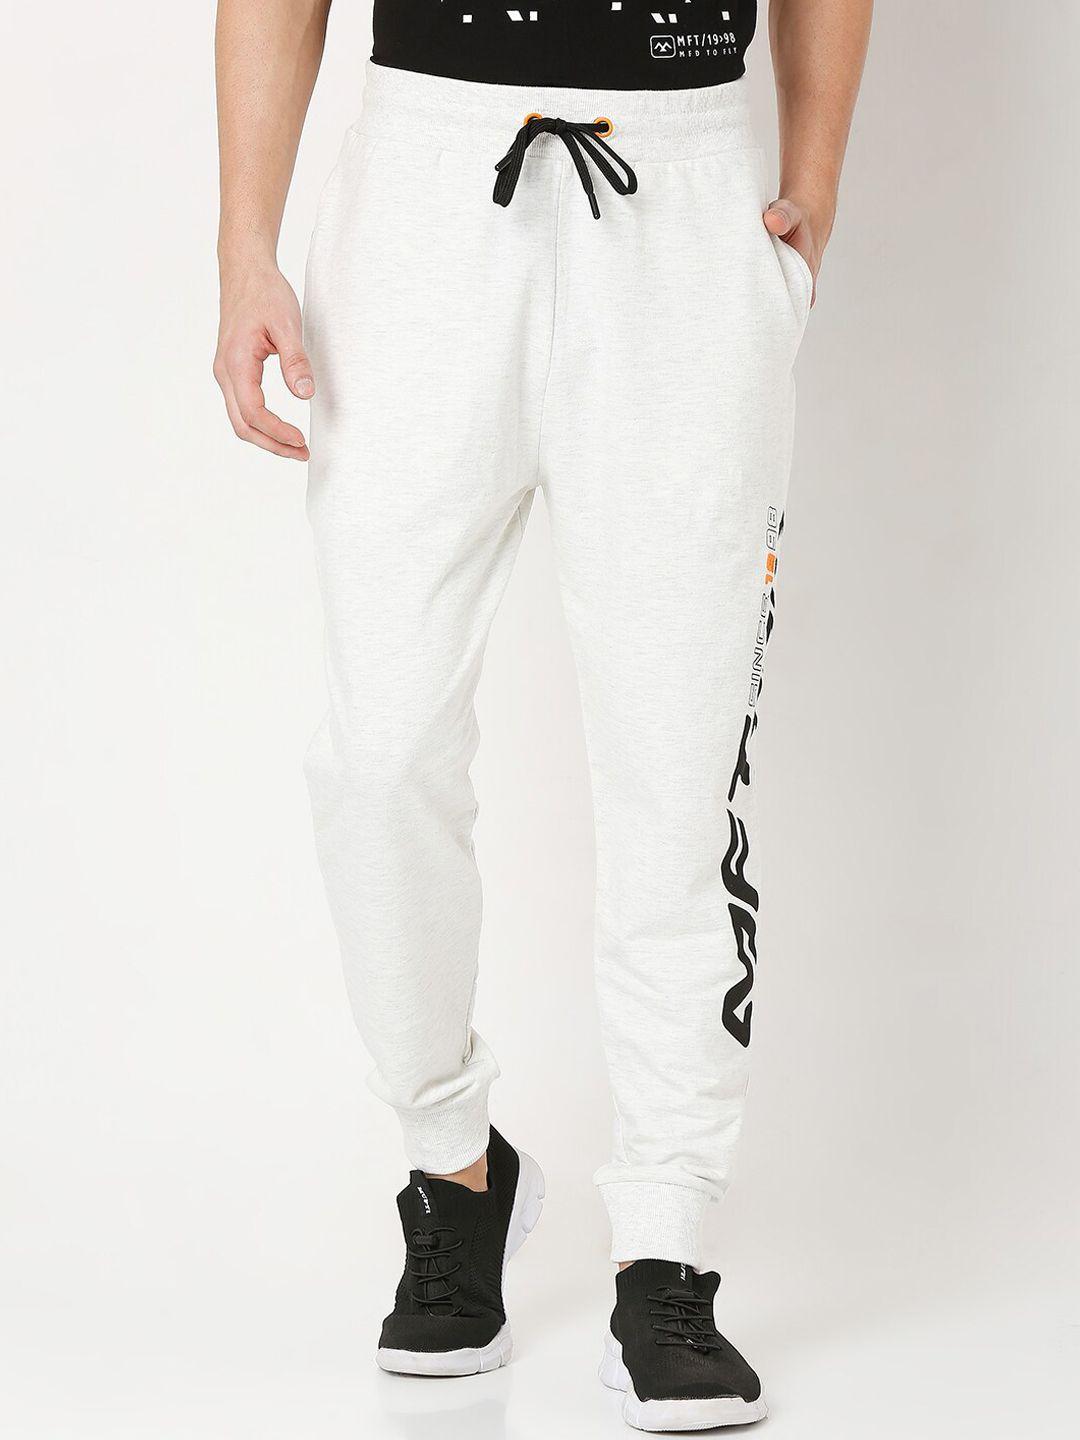 mufti-men-grey-loose-fit-joggers-trousers